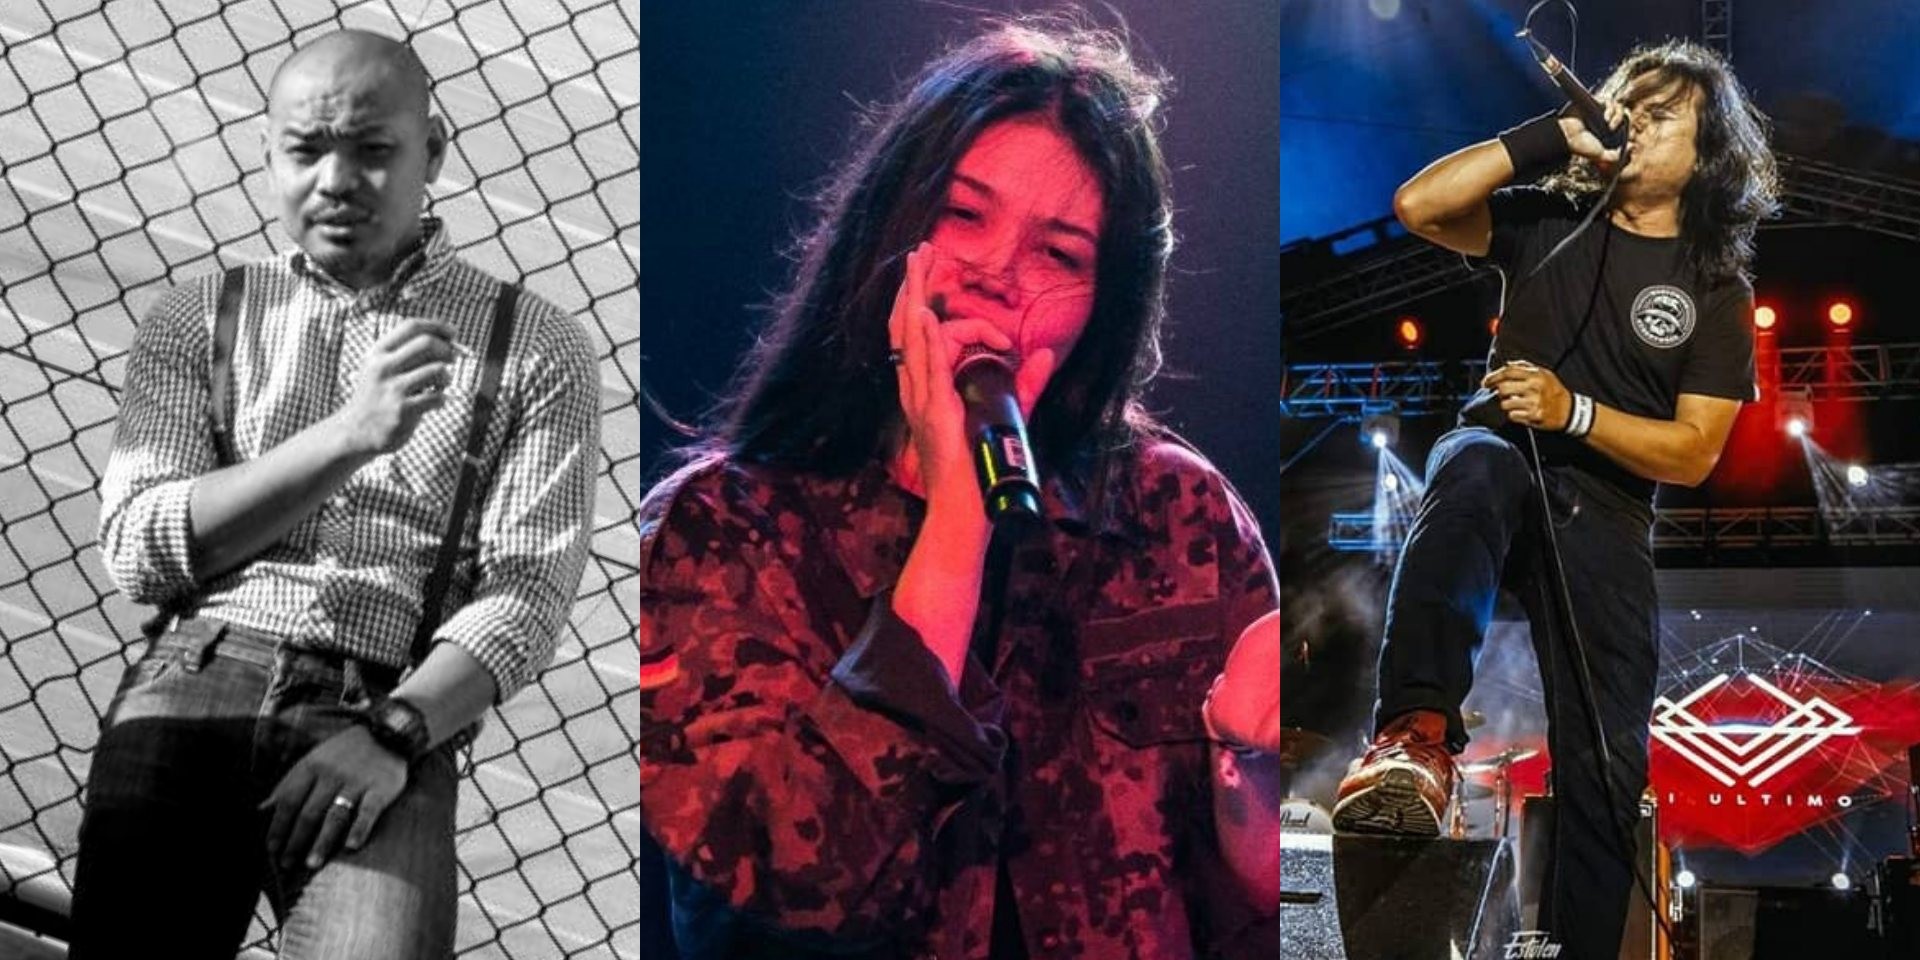 Vans Musicians Wanted 2019: Get inspired by past winners Generation 69, Shye and Mi Ultimo